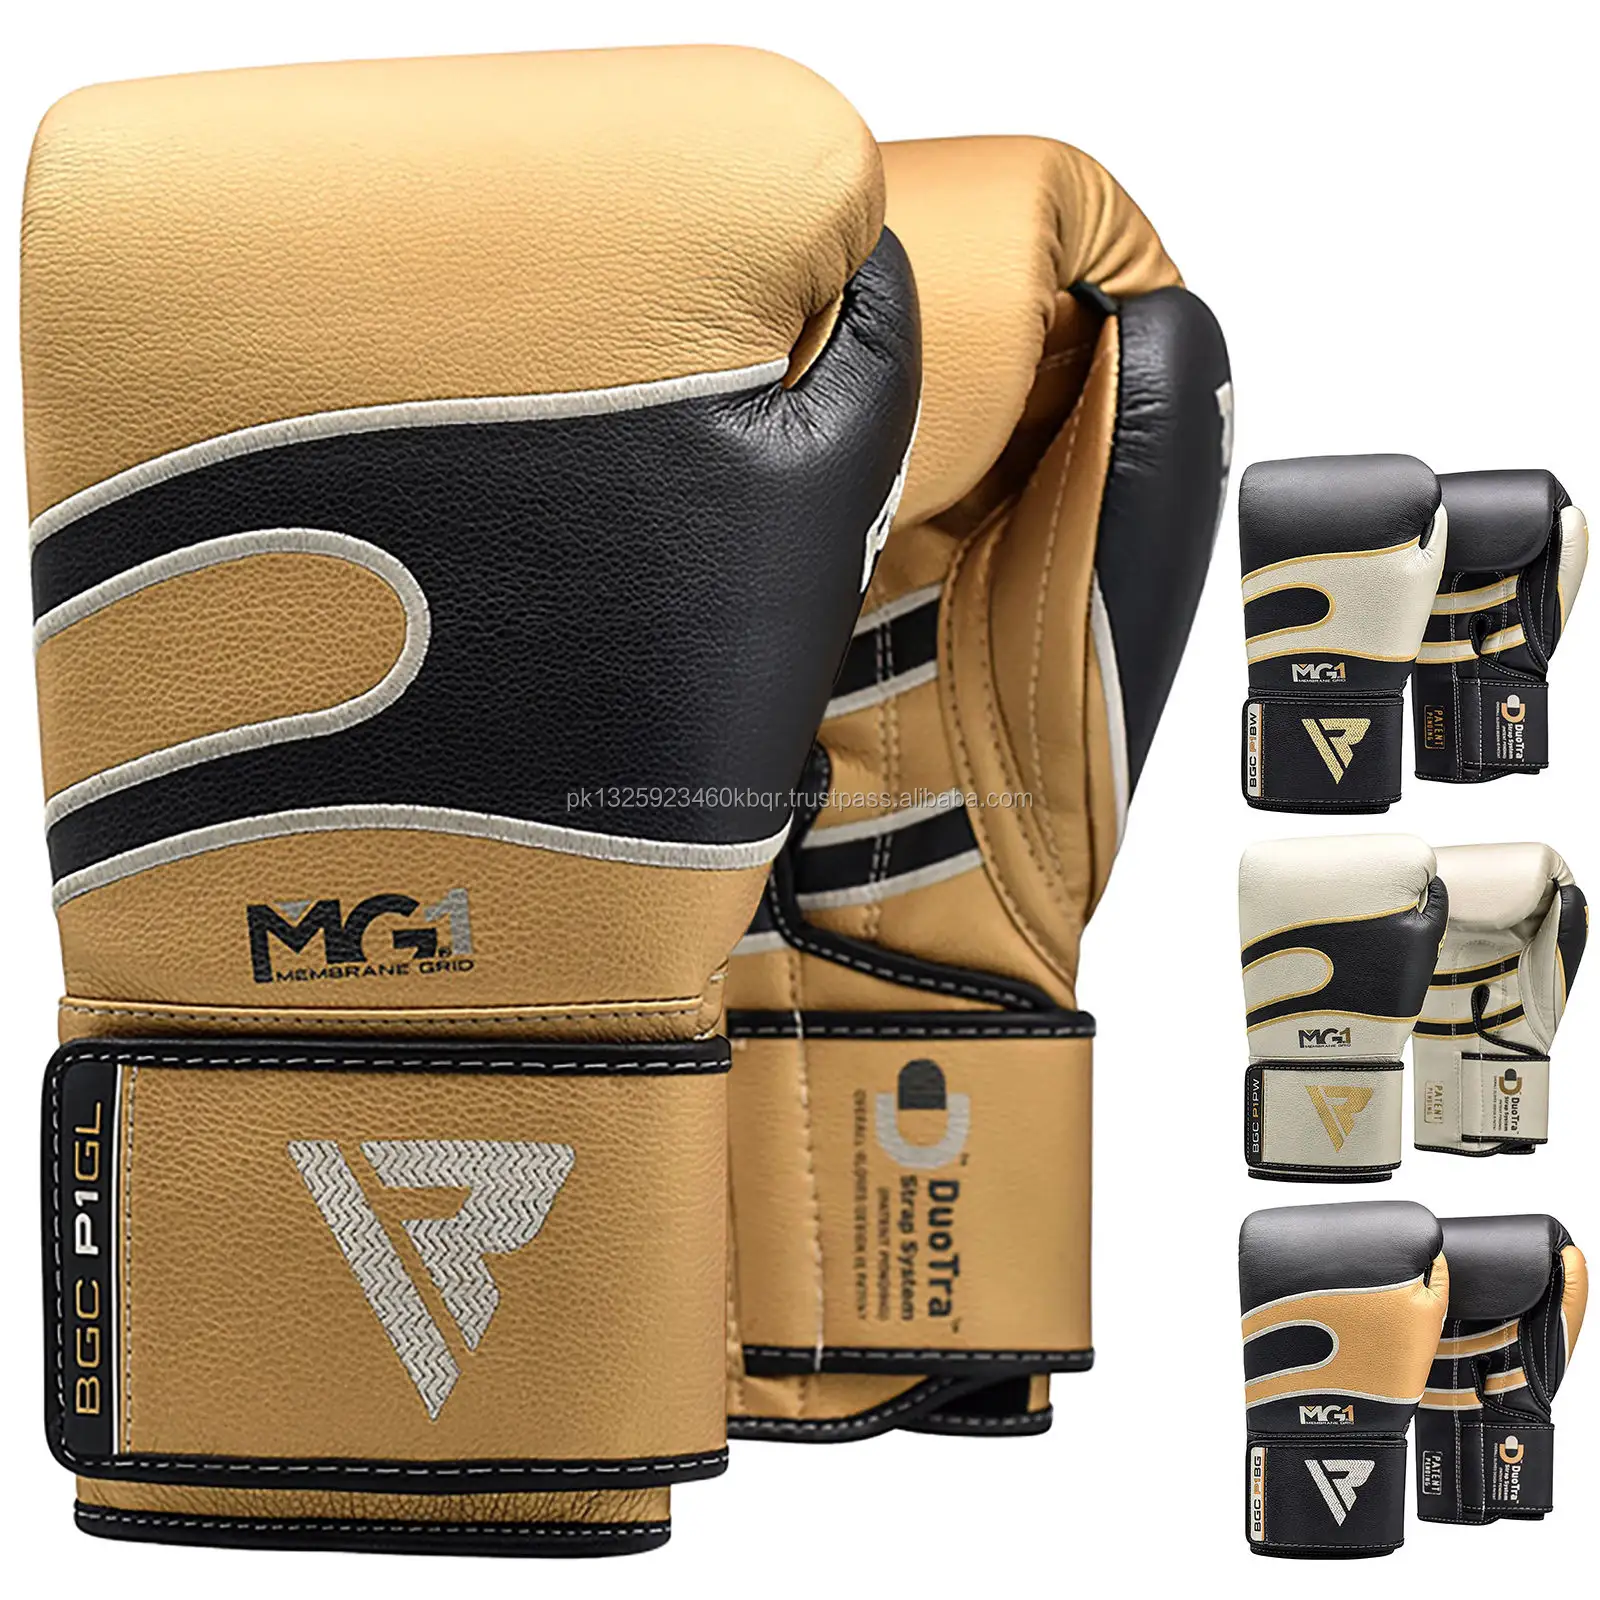 Professional Custom Made Boxing Gloves Sparring Training MMA Muay Thai Kick Boxing Punch Bag